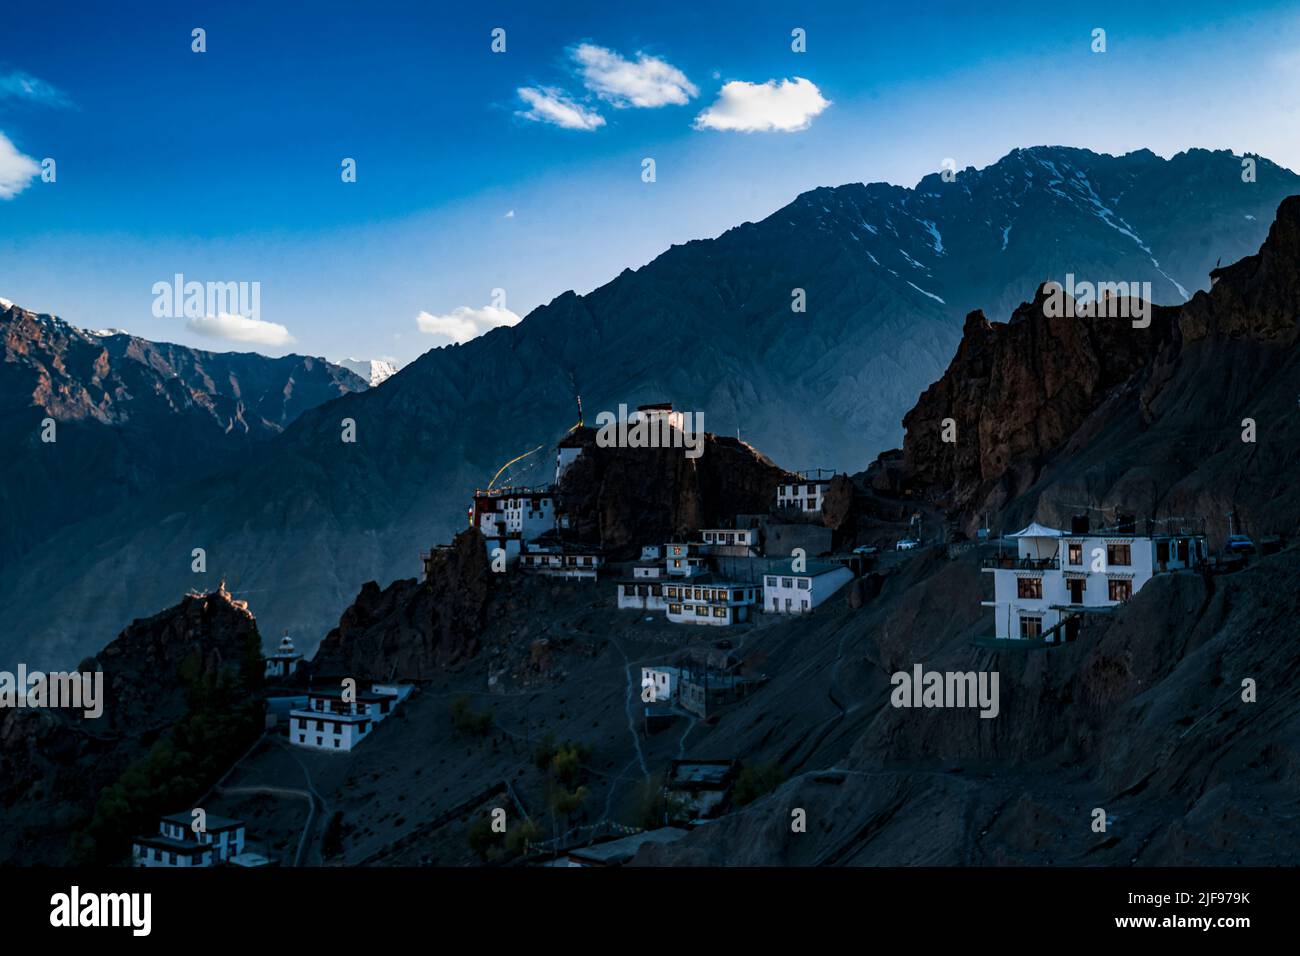 A breathtaking view ofwhite houses on the hill on blue cloudy sky background Stock Photo